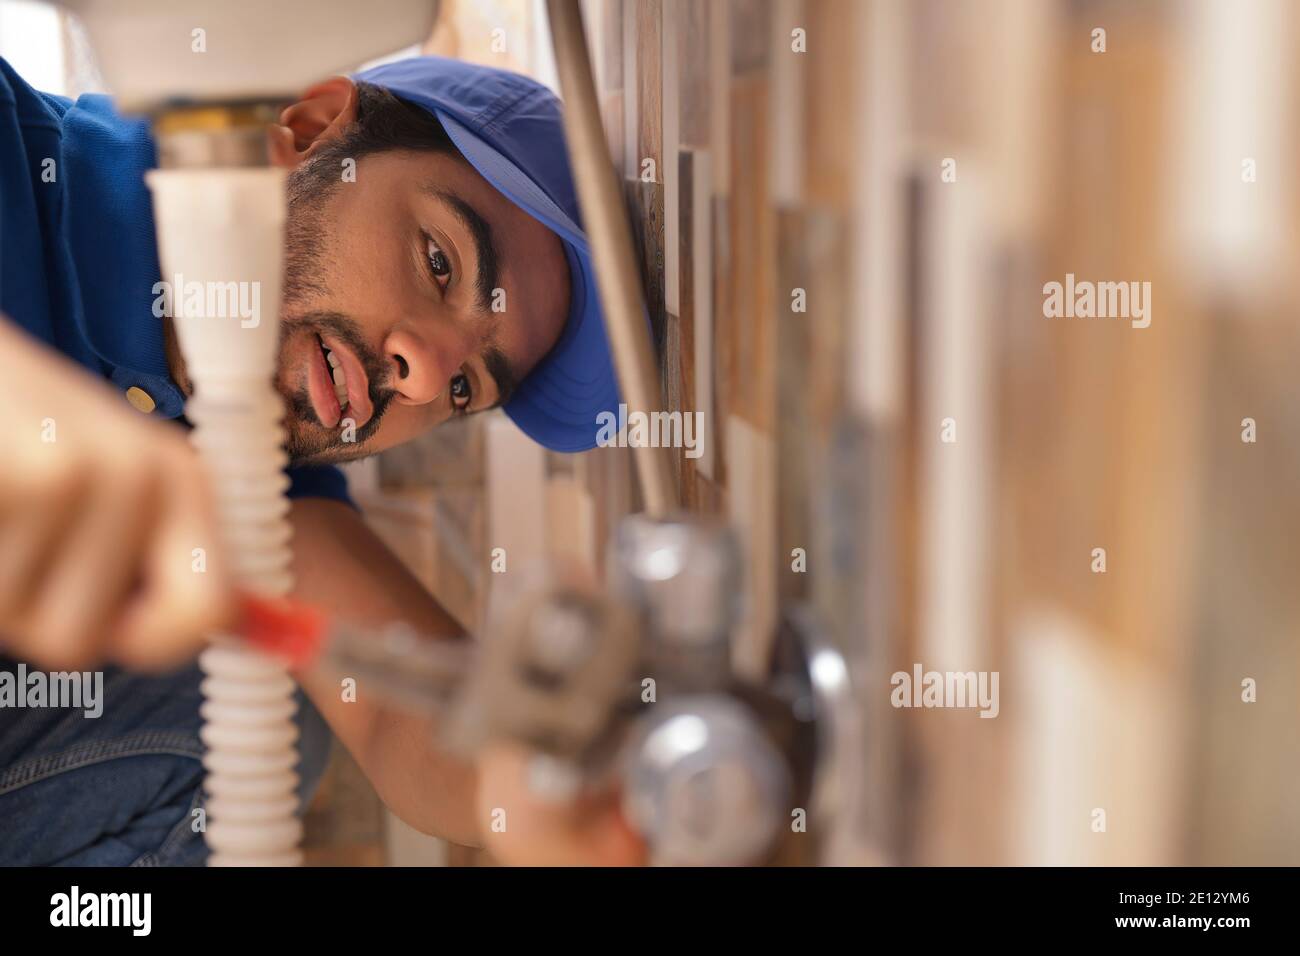 A YOUNG PLUMBER LEANING DOWN AND FIXING LEAKAGE OF A PIPE Stock Photo